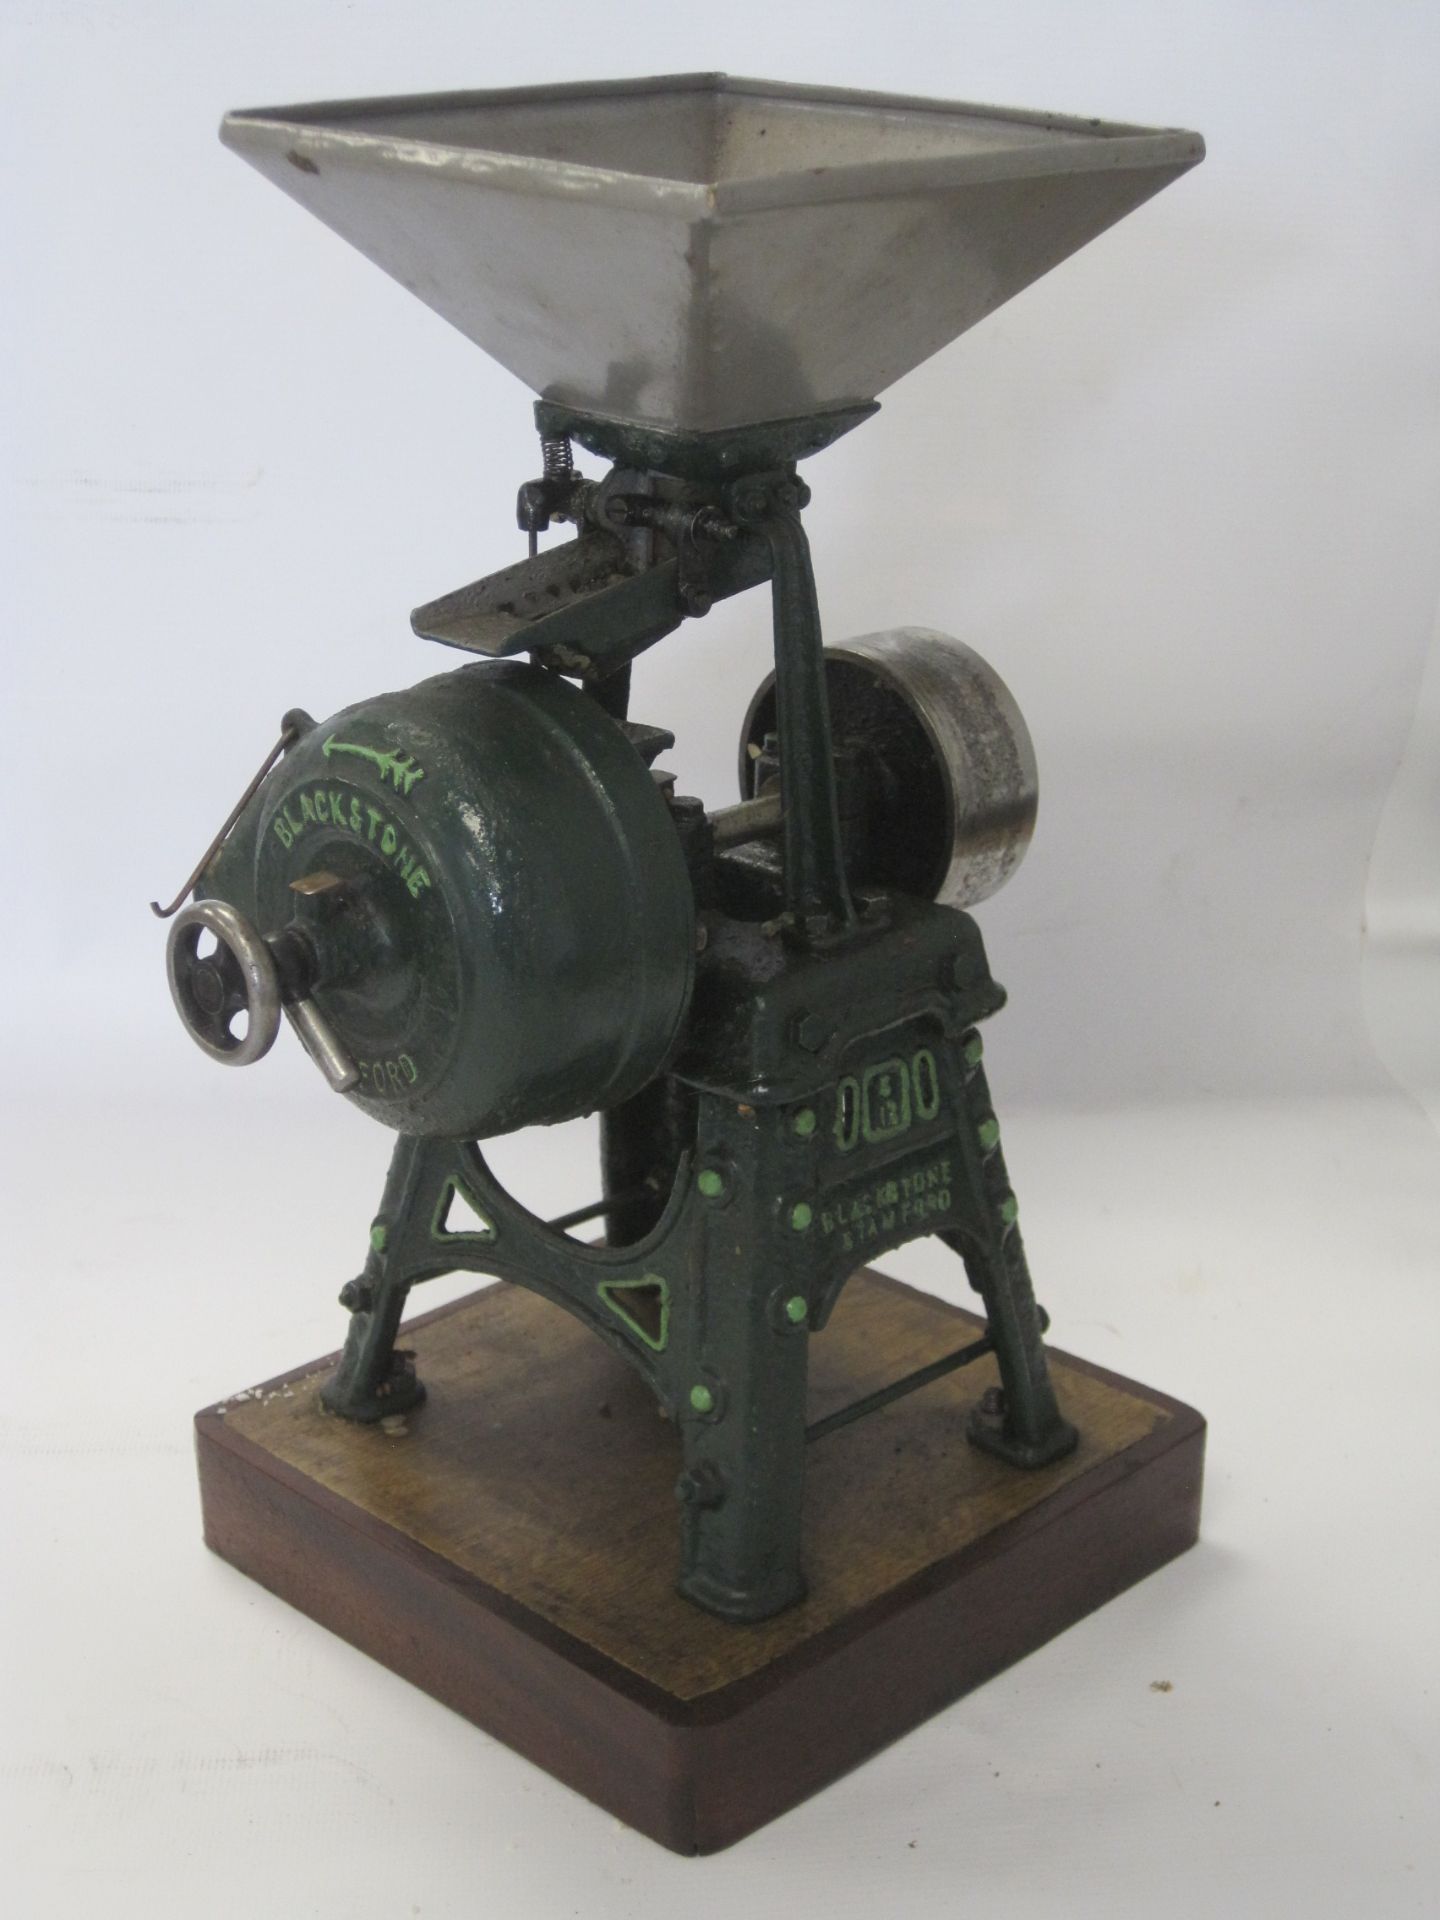 Blackstone Stamford scale model grinding mill, with reciprocating feed trough and mounted to a - Image 2 of 2